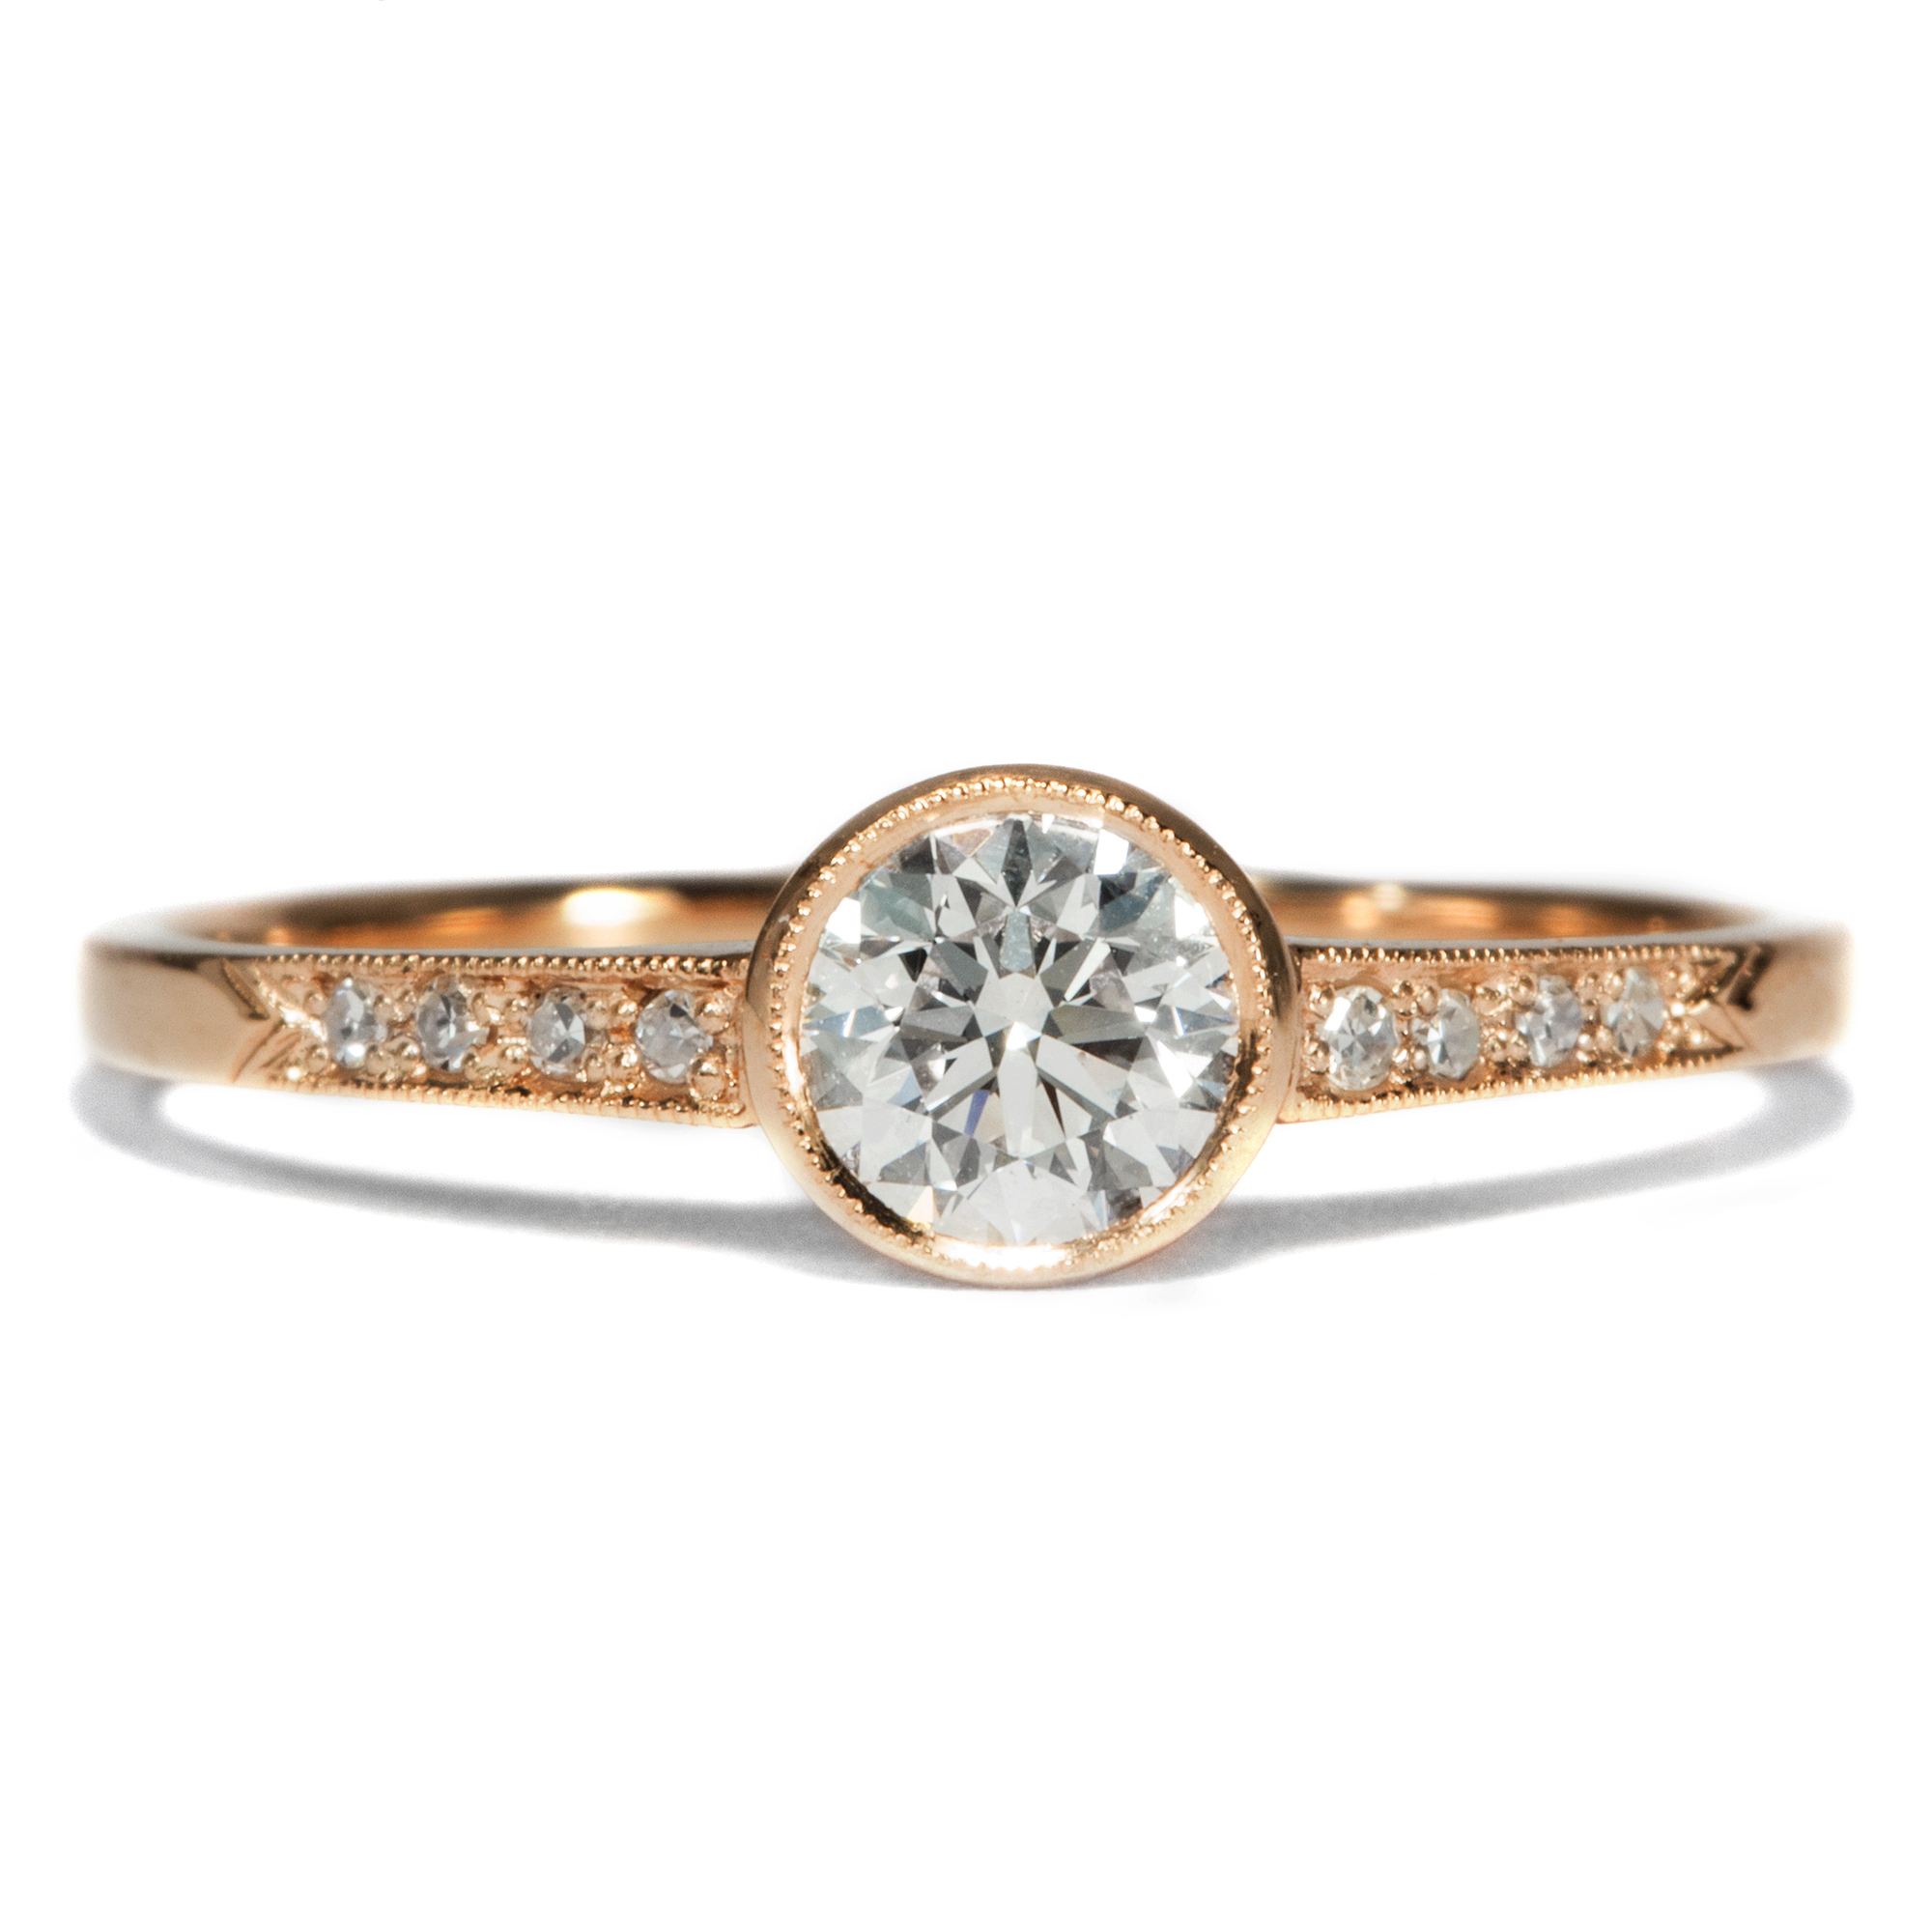 Classic Engagement Ring With 0.41 Ct Diamonds From Our Workshop